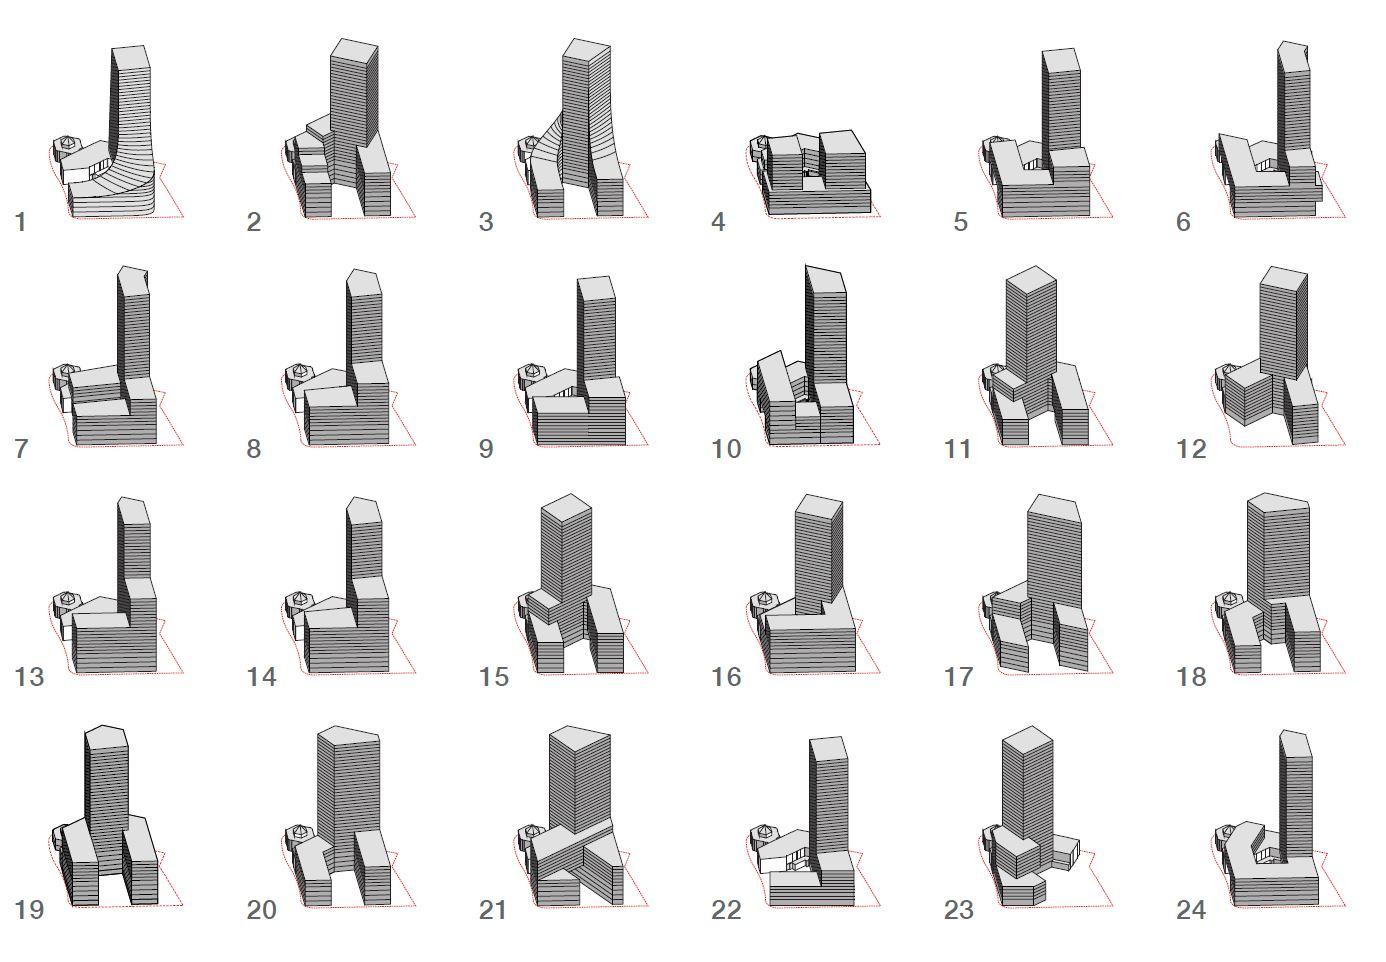 24 iterations of the same massing of a tower and podium on an irregular shaped site